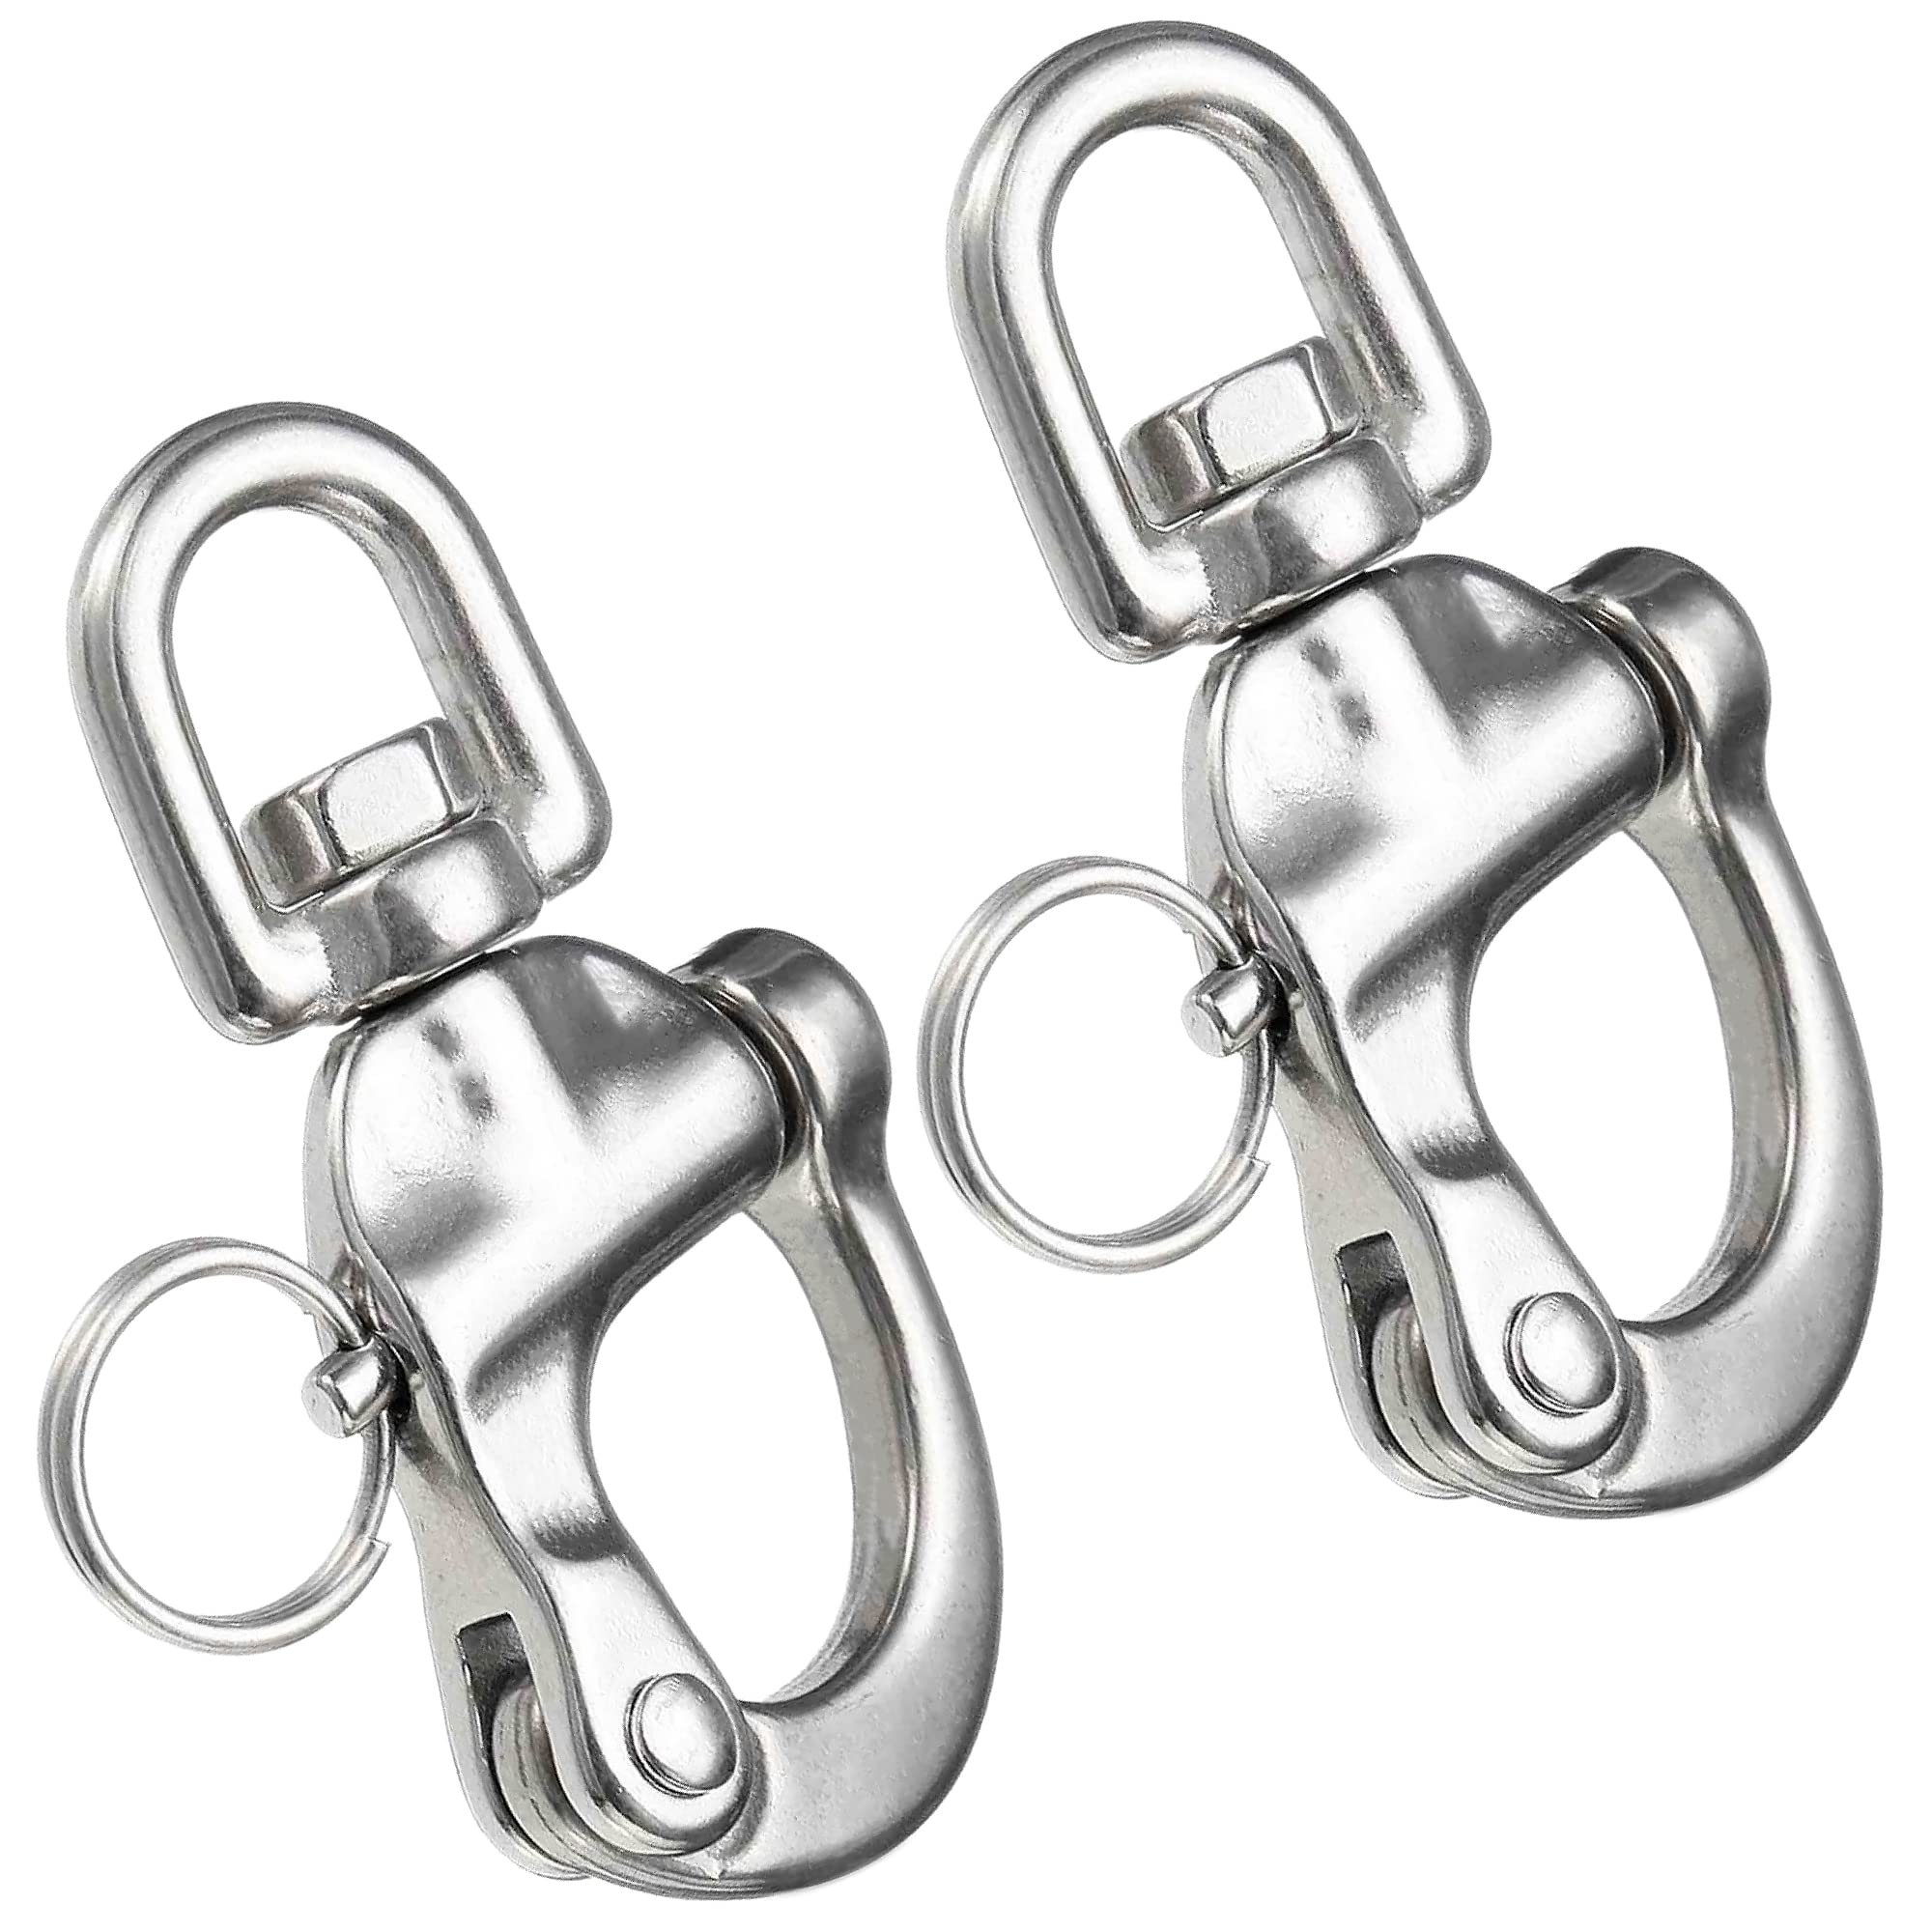 Five Oceans Swivel Eye Snap Shackle Quick Release Bail Rigging for